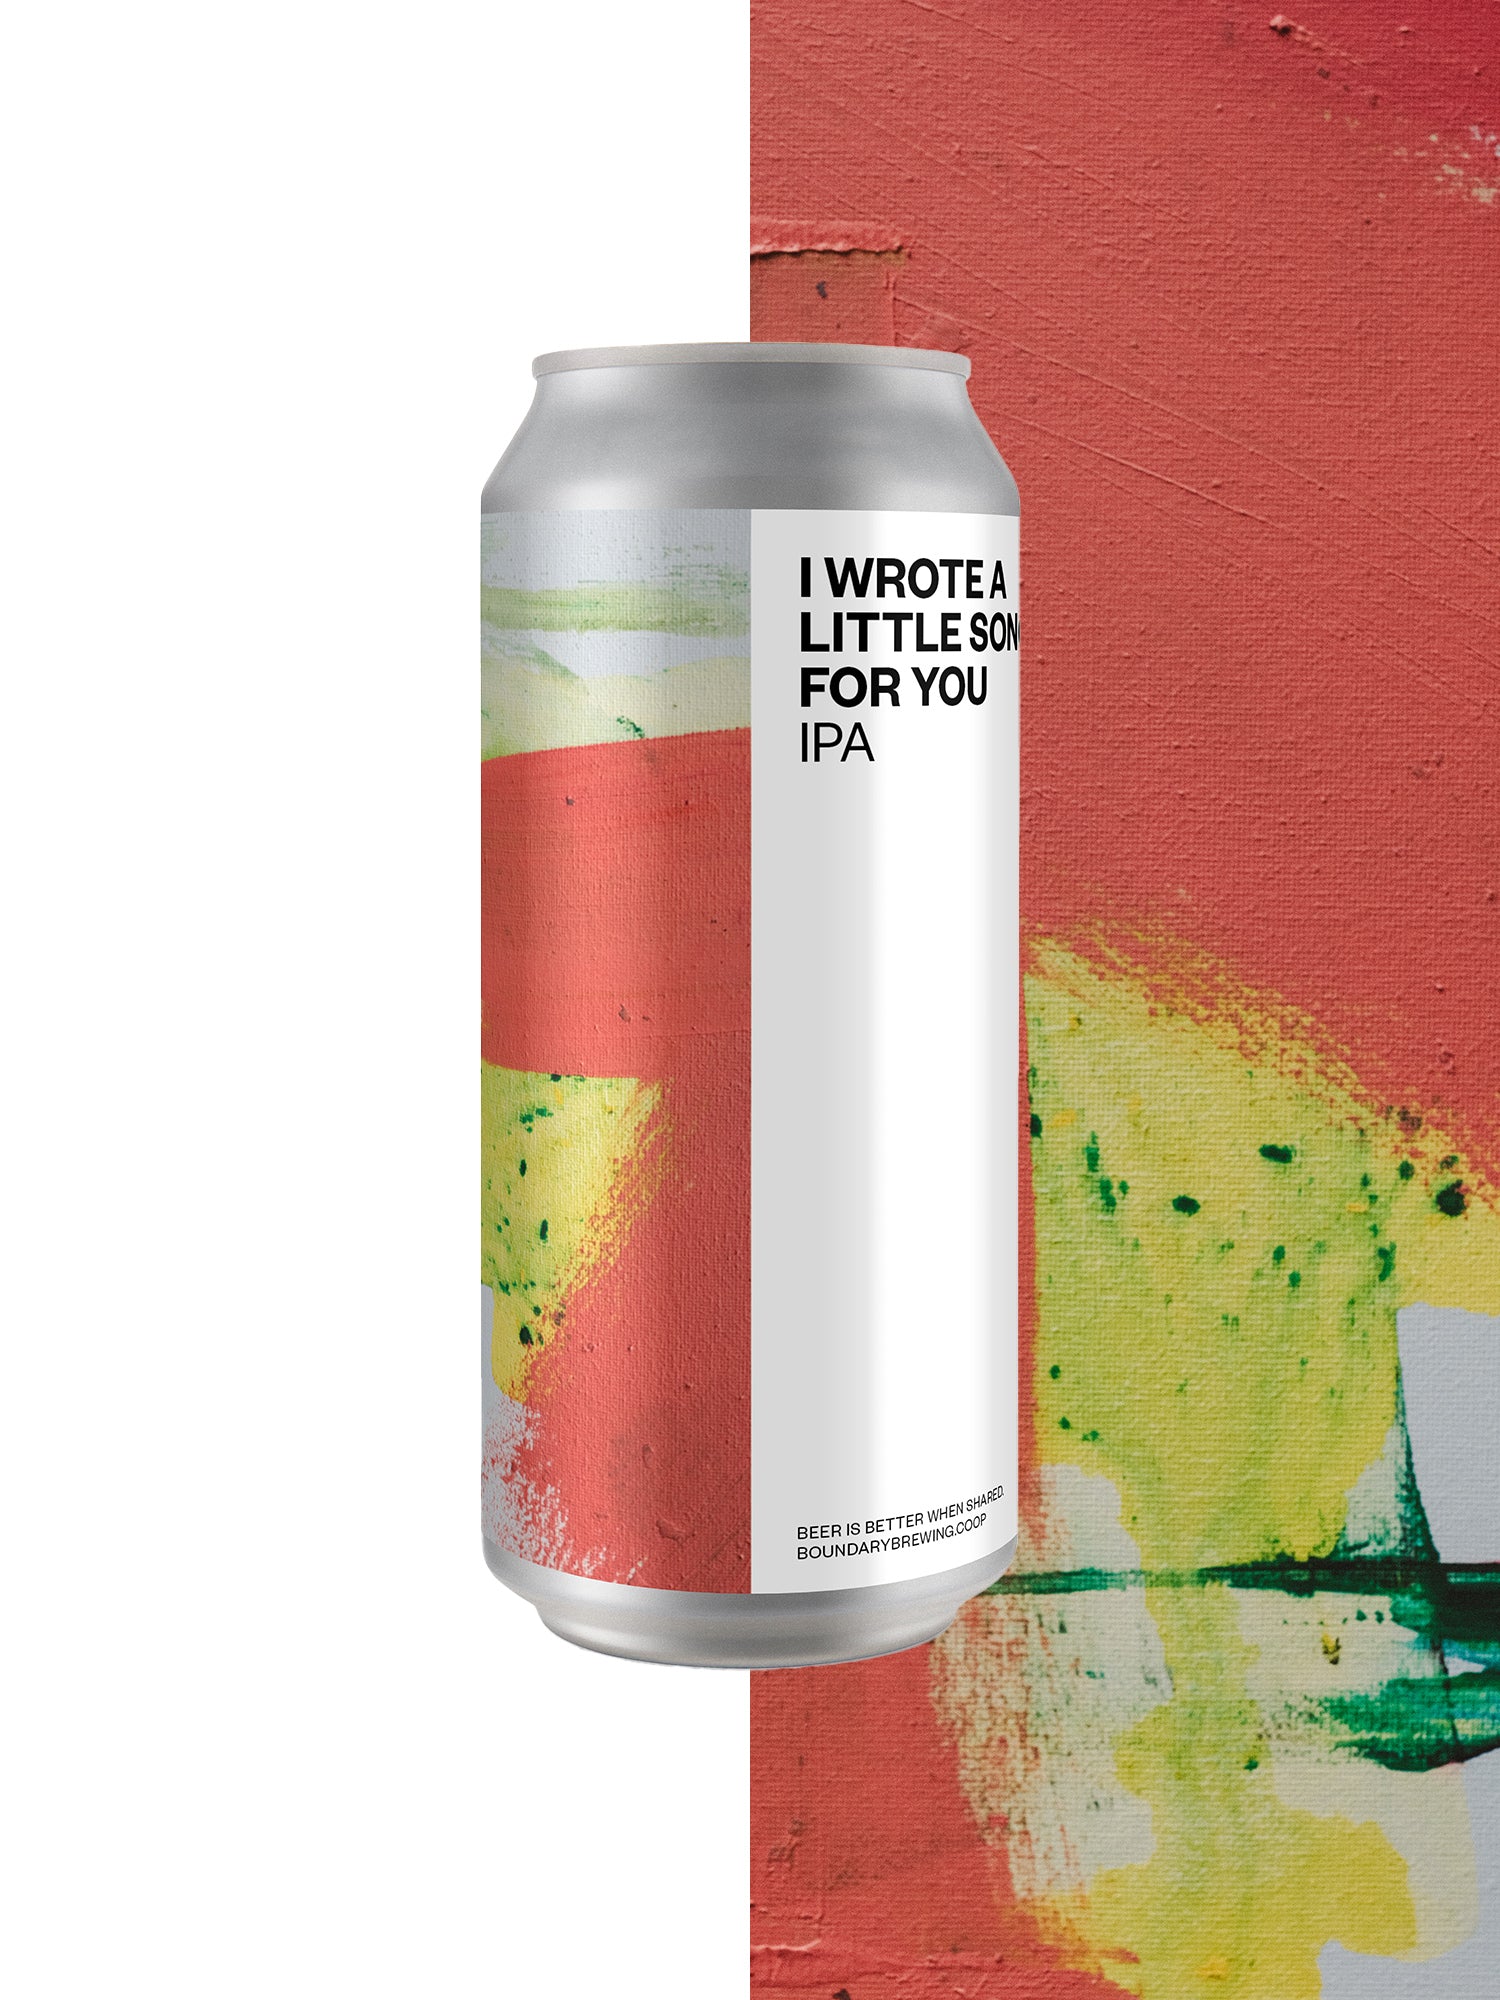 I WROTE A LITTLE SONG FOR YOU IPA (4-pack) 6.2%